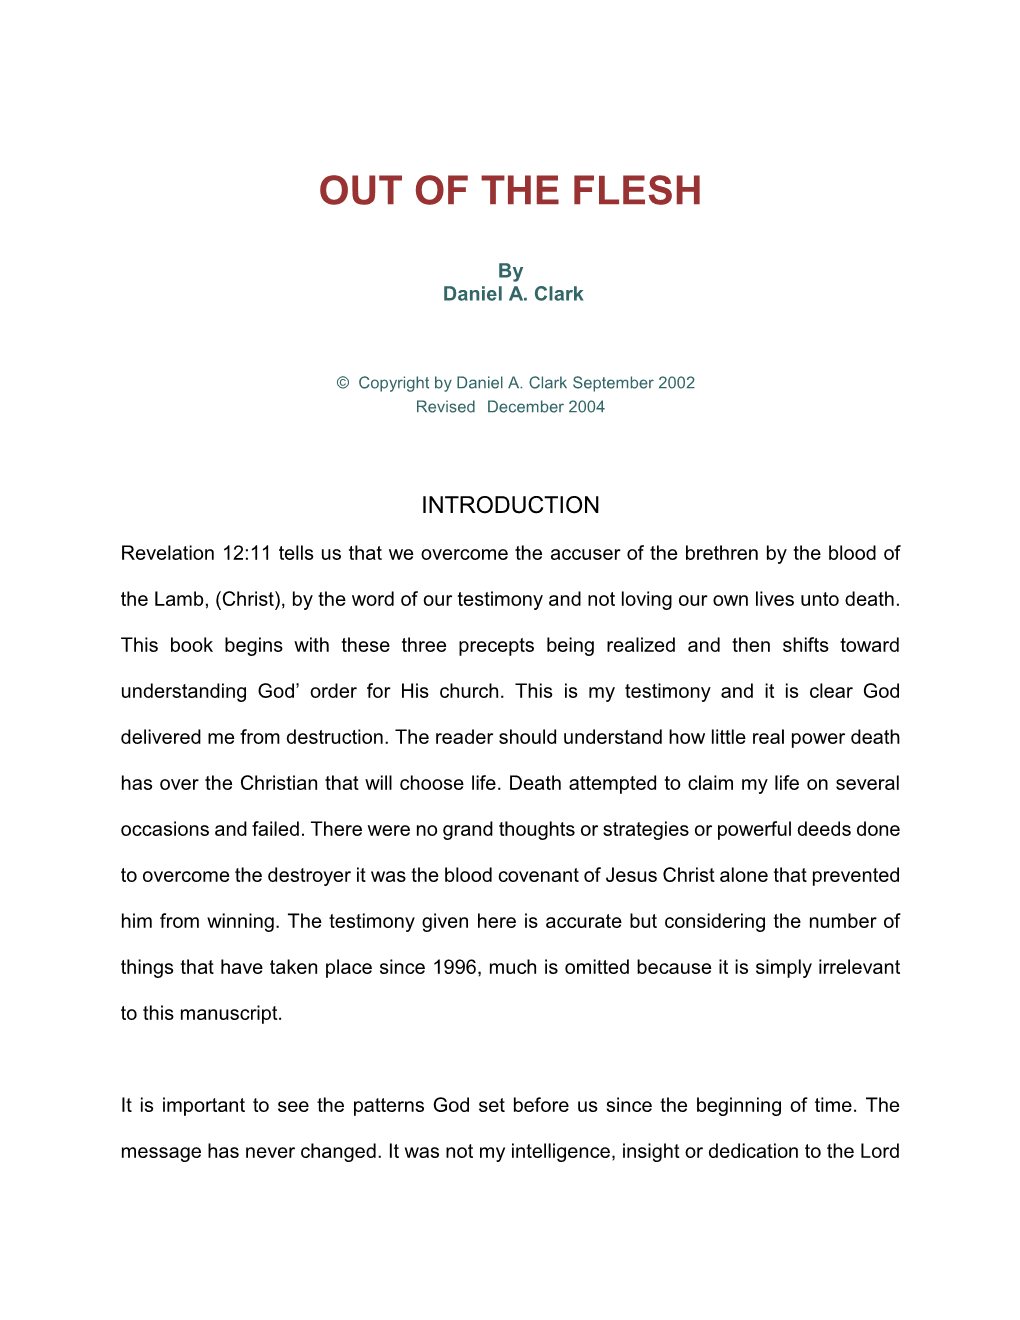 Out of the Flesh (Pdf)